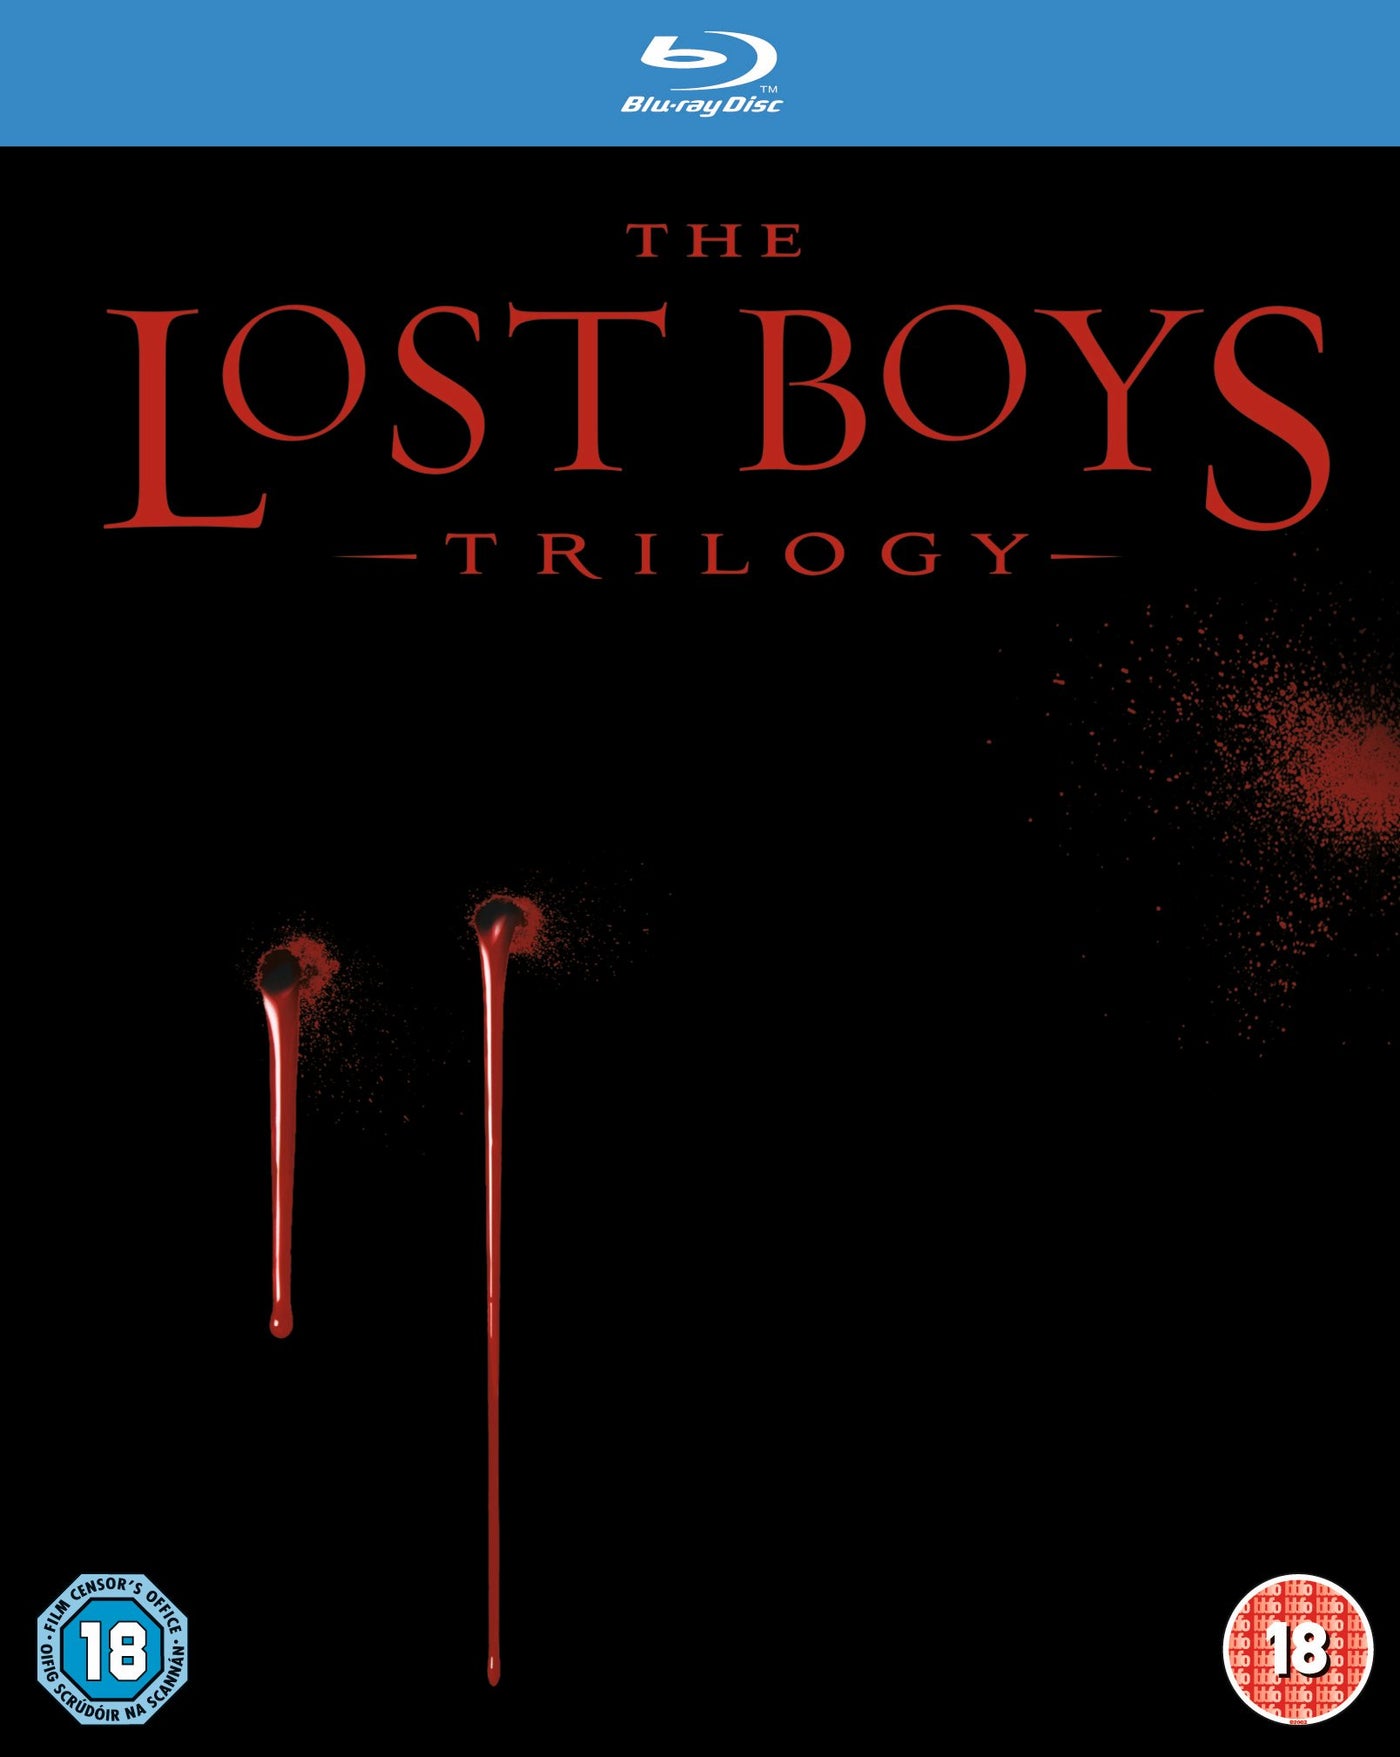 The Lost Boys Trilogy [1987] (Blu-ray)